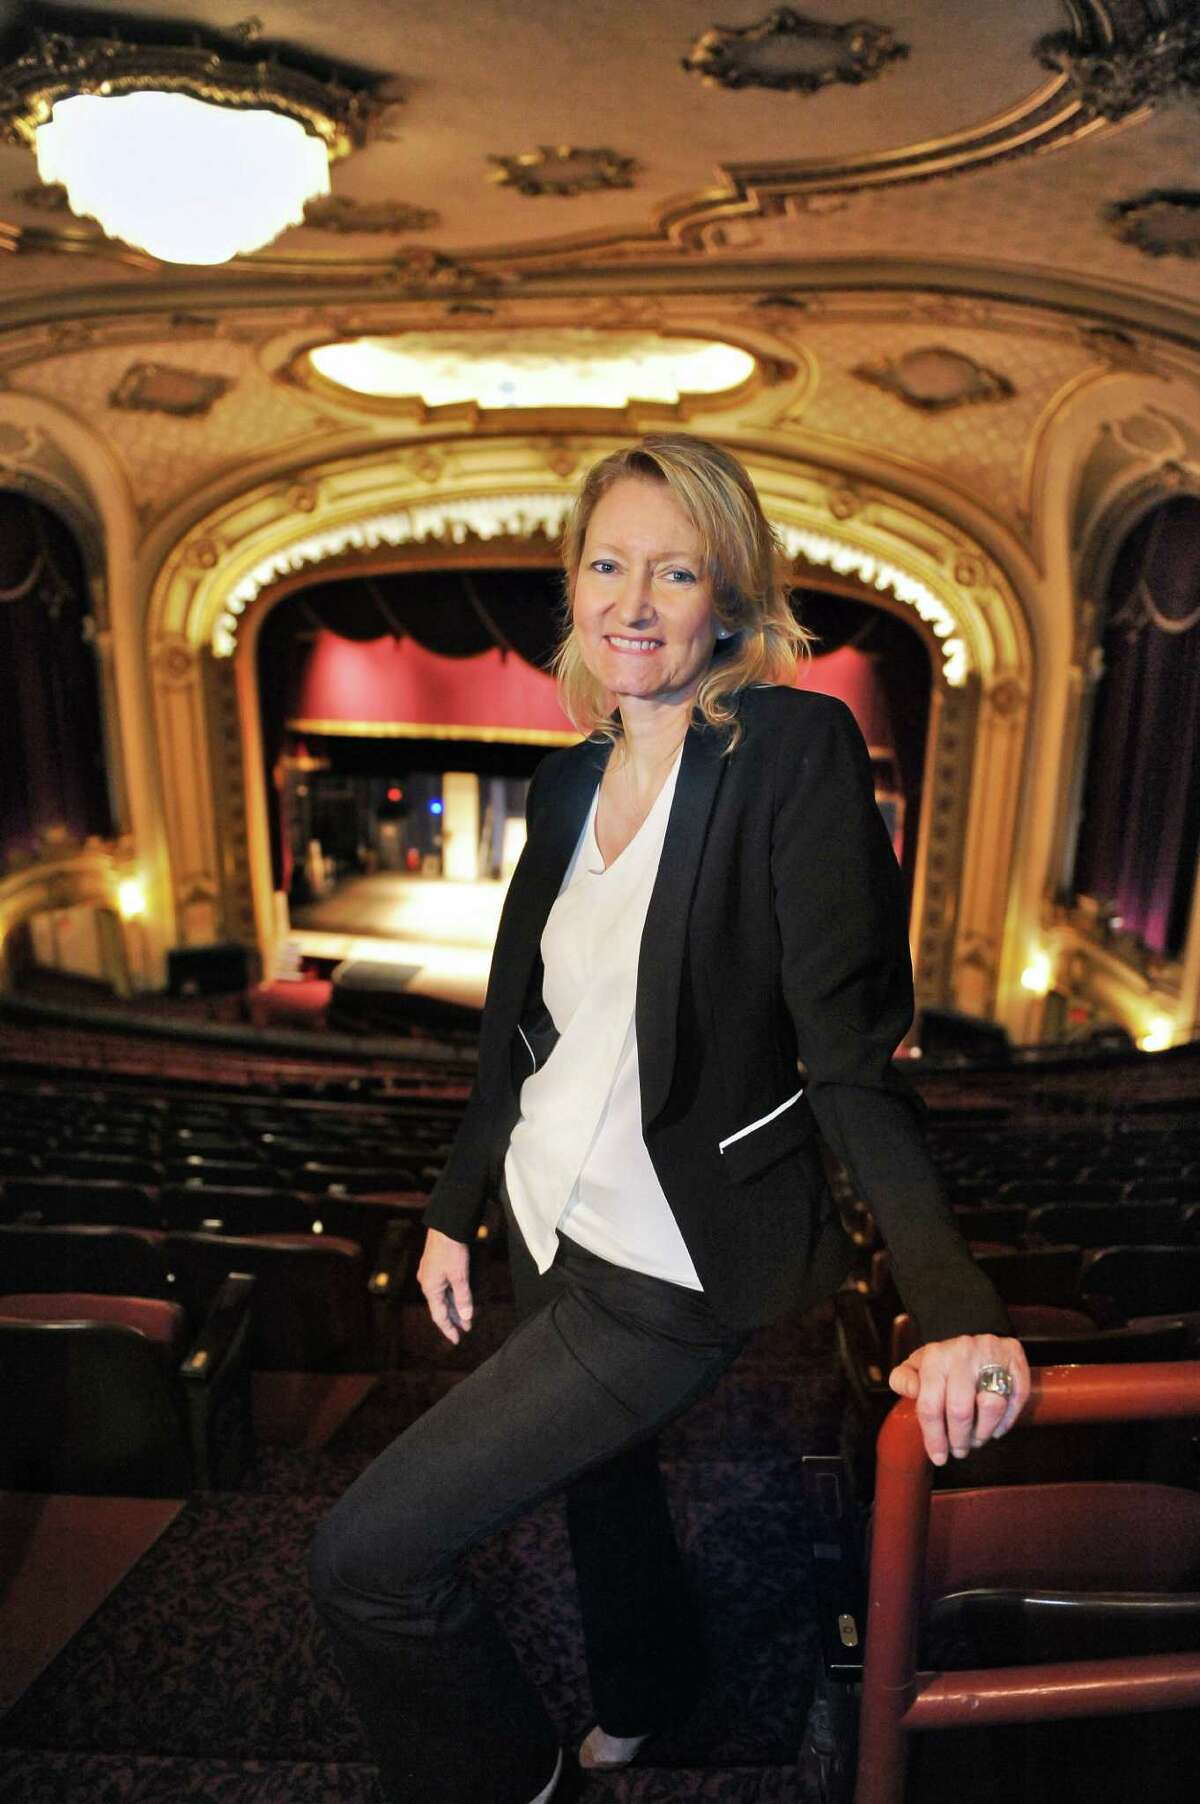 Holly Brown, executive director of the Palace Theatre, stands in the balcony on Wednesday, May 25, 2016, at the Palace Theatre in Albany, N.Y. (John Carl D'Annibale / Times Union)